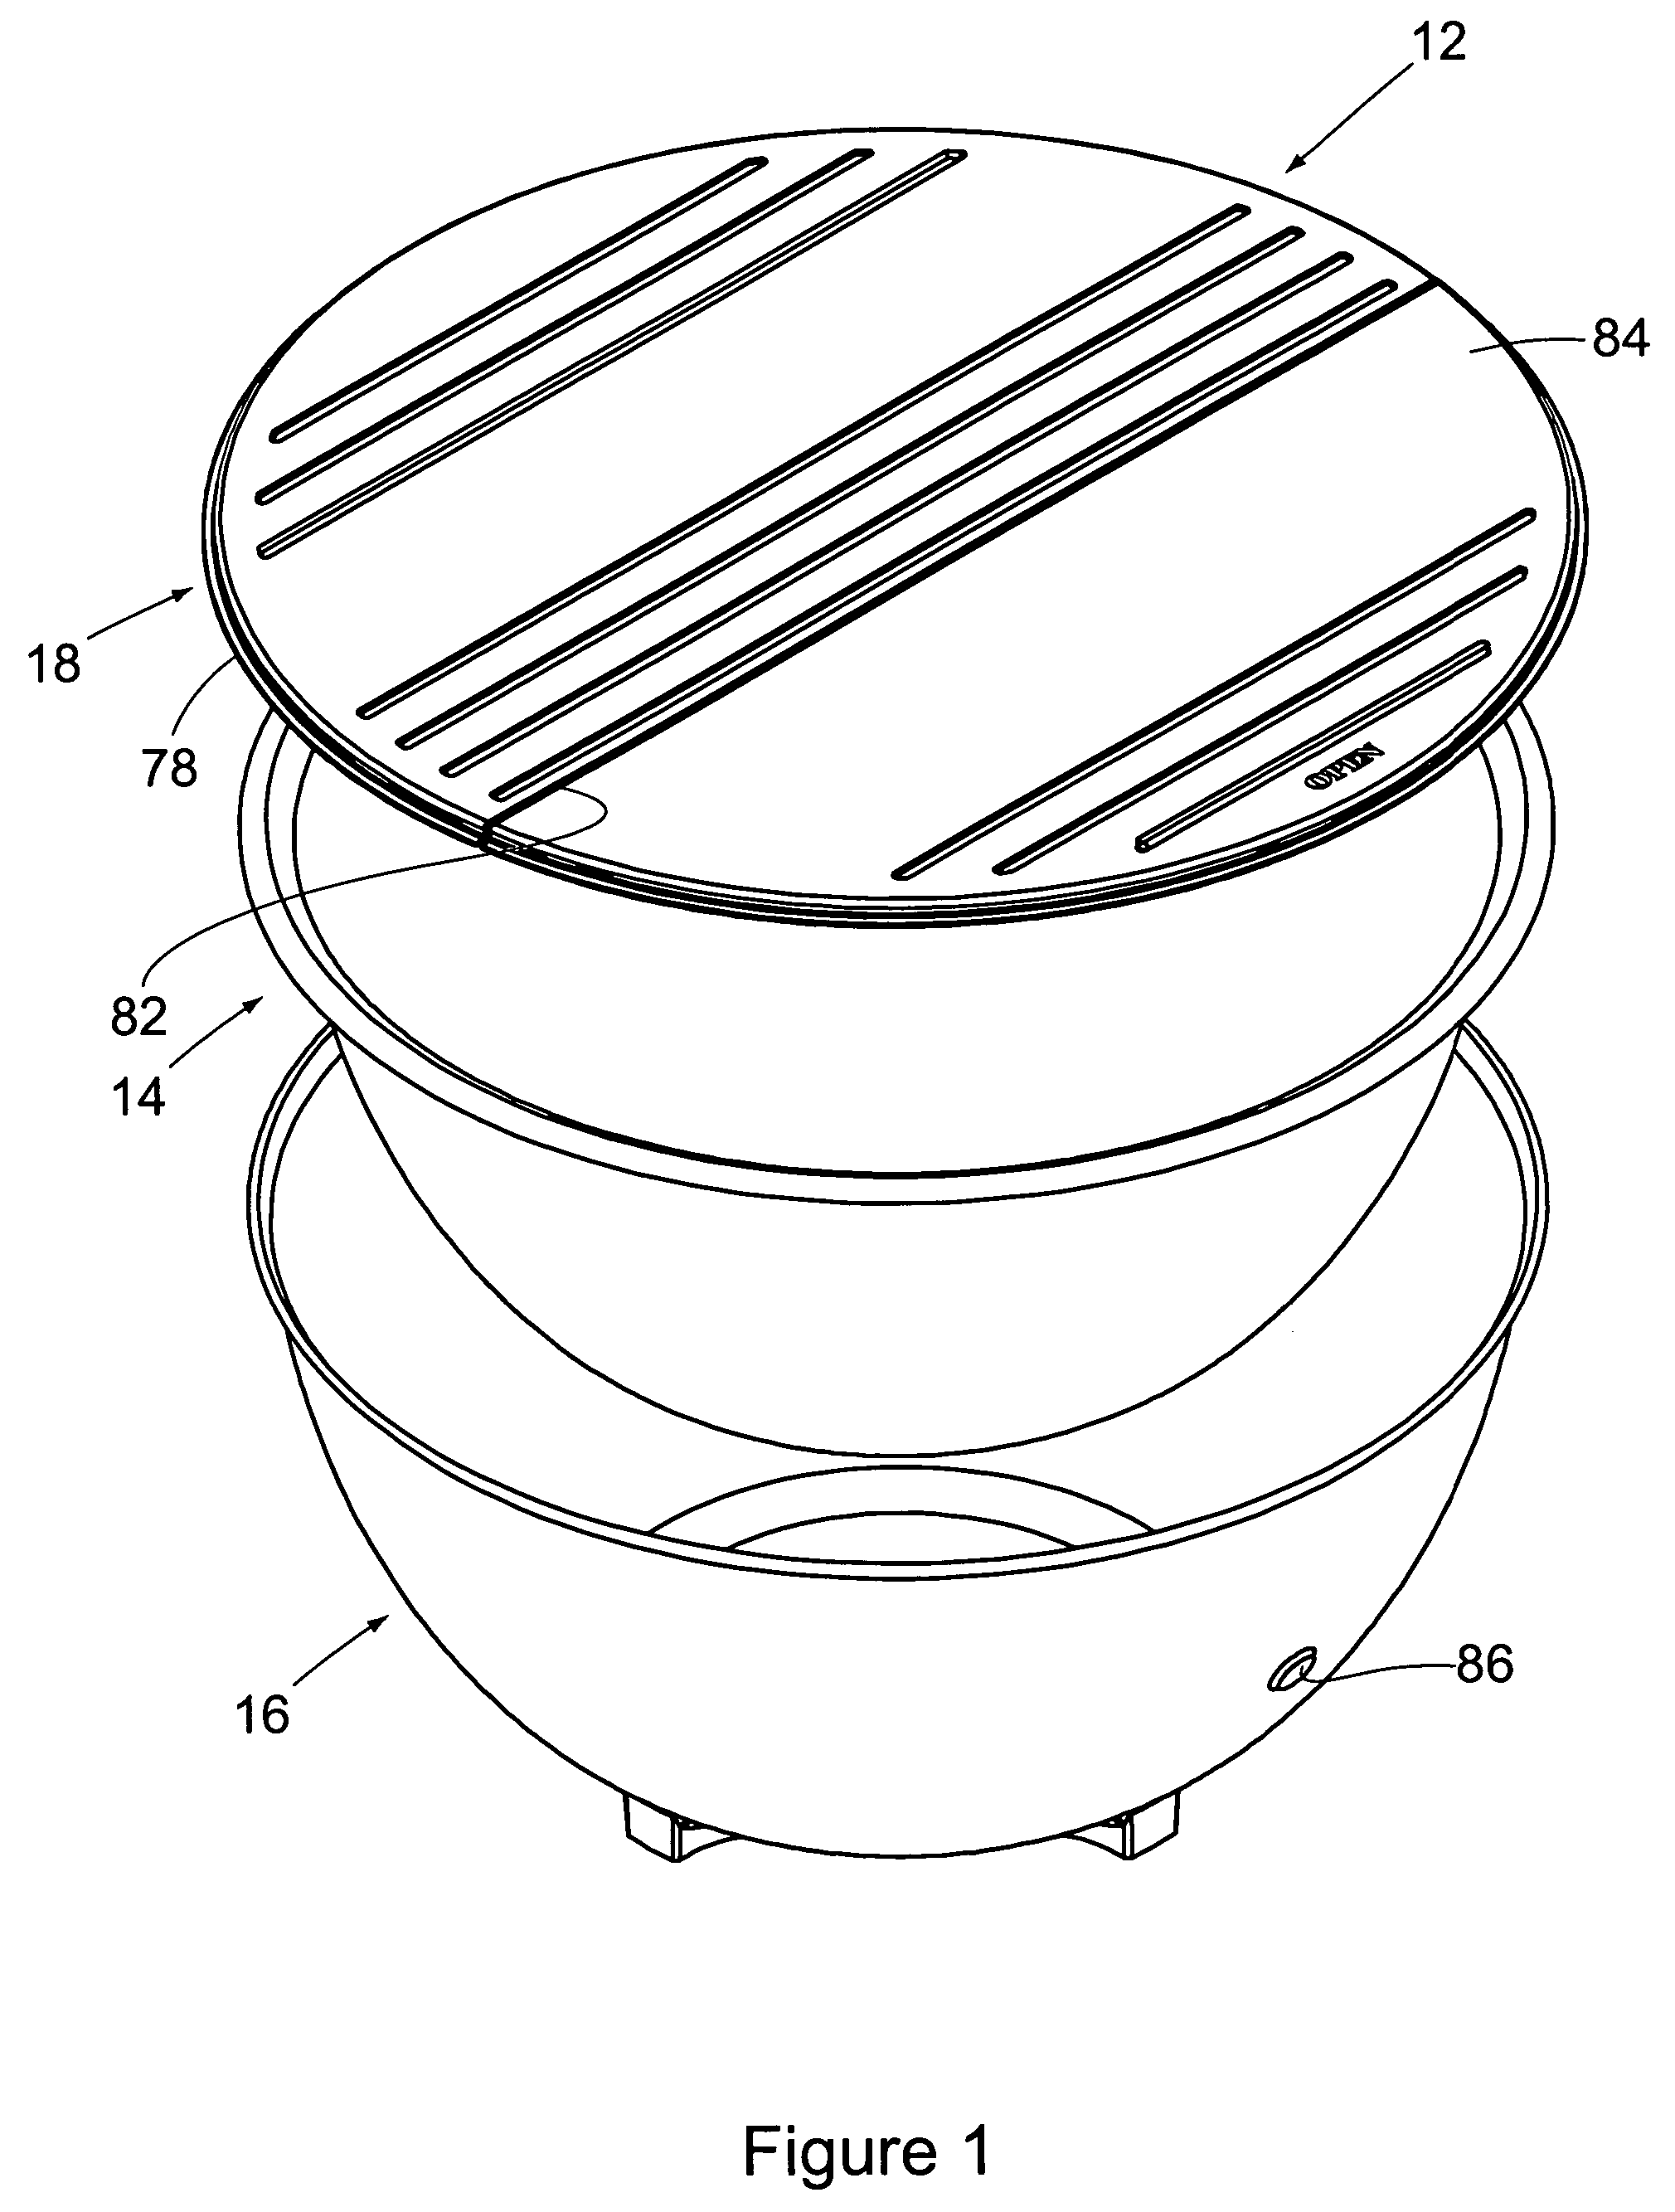 Food and beverage storage and serving vessel comprising an integral phase change material